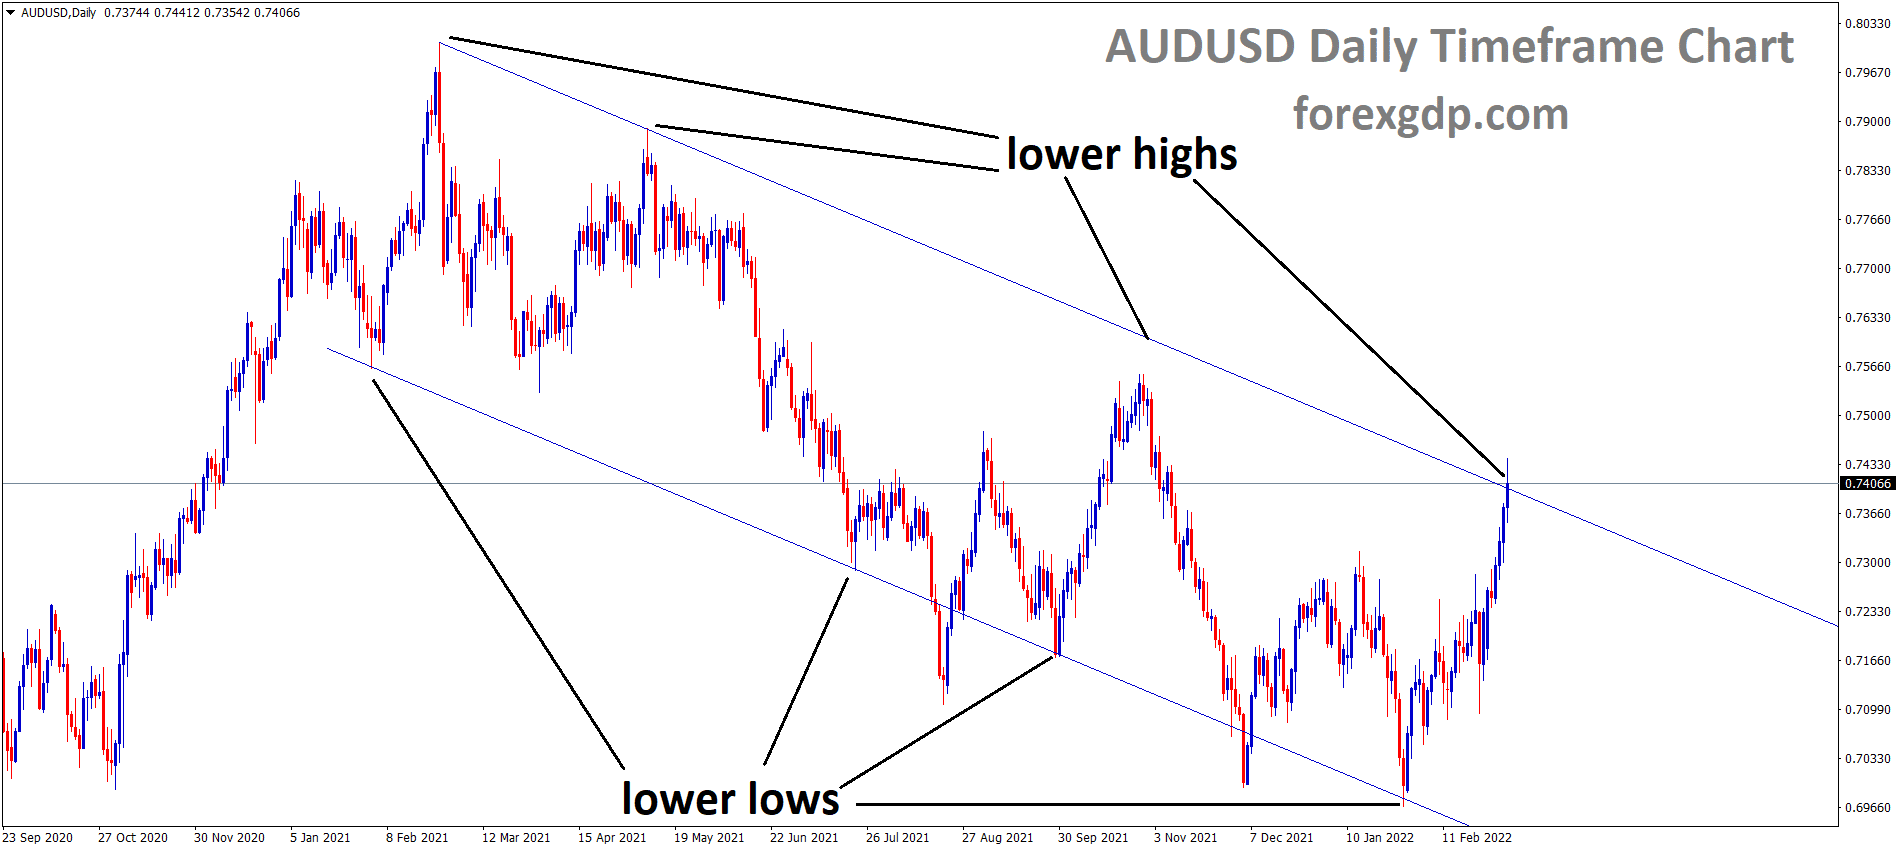 AUDUSD is moving in the Descending channel and the market has reached the lower high area of the channel